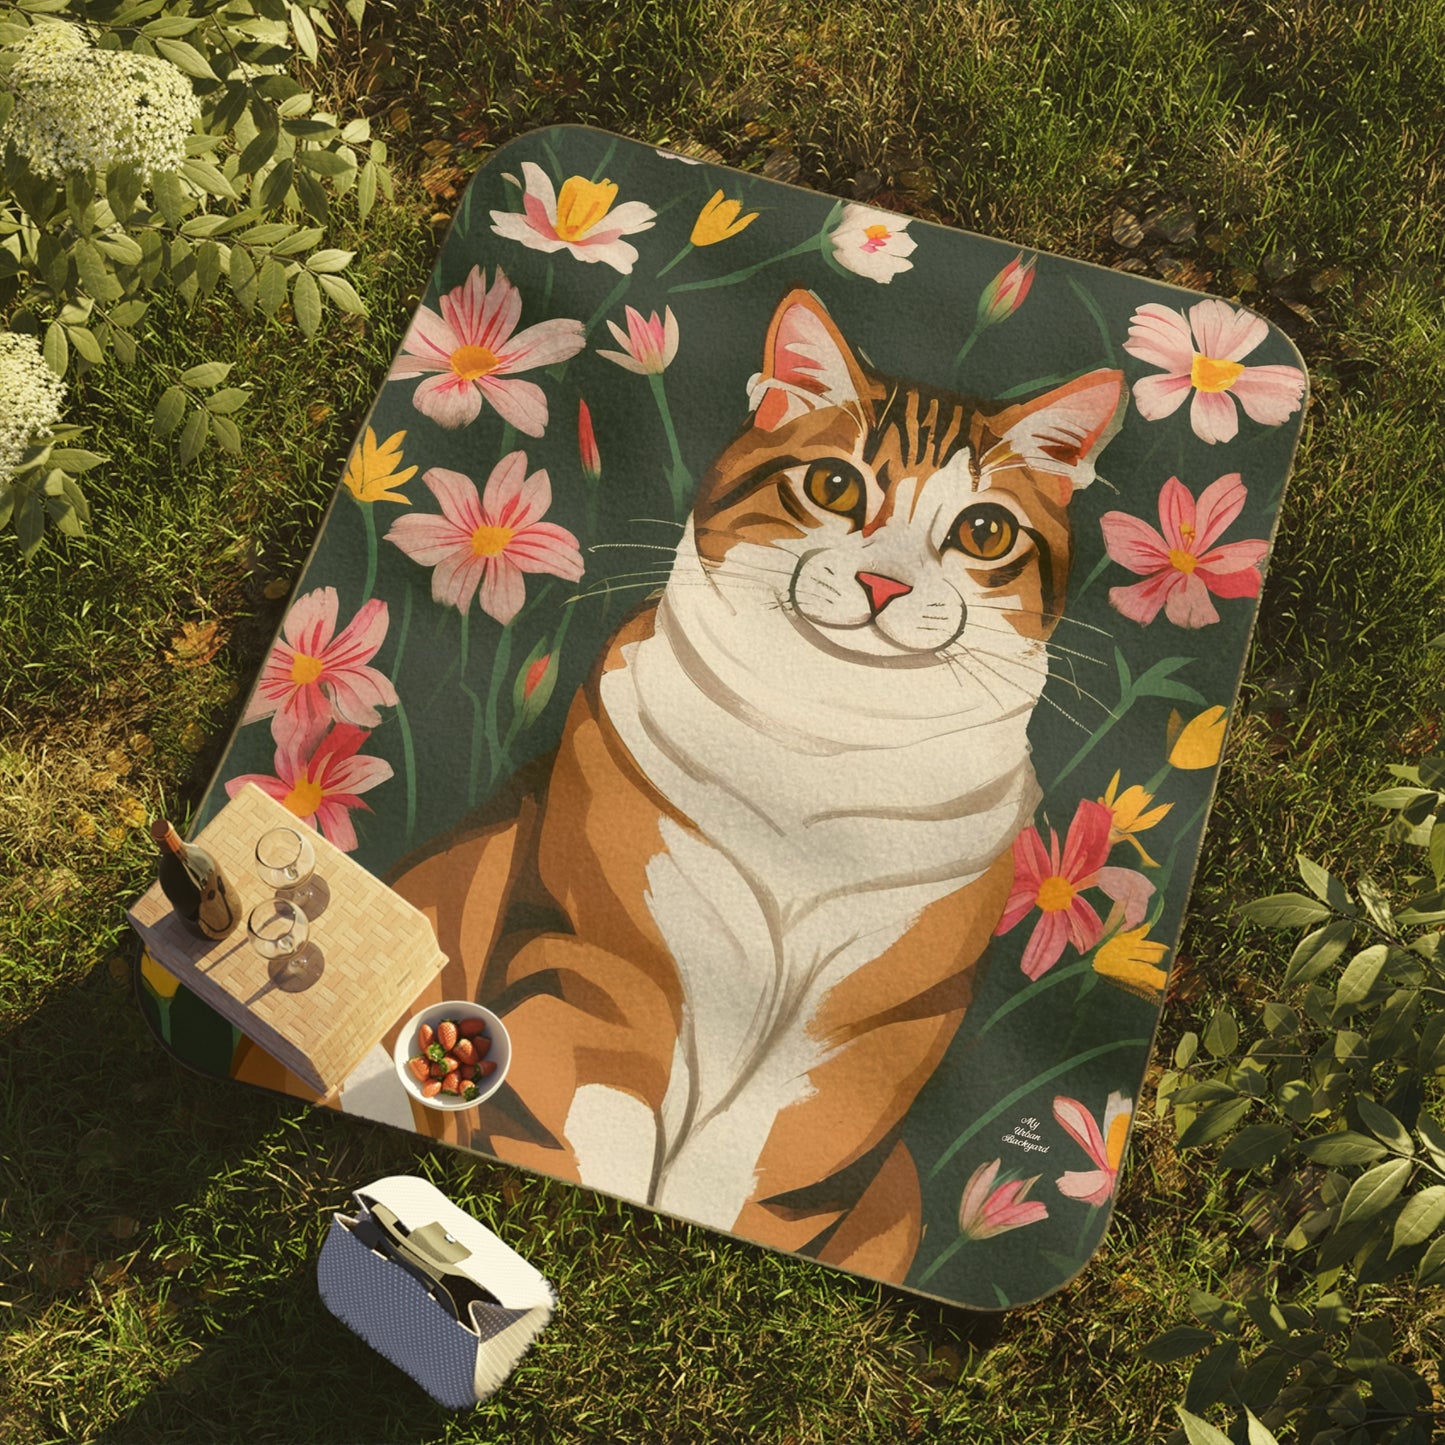 Outdoor Picnic Blanket with Soft Fleece Top and Water-Resistant Bottom - Cat and Pink Flowers